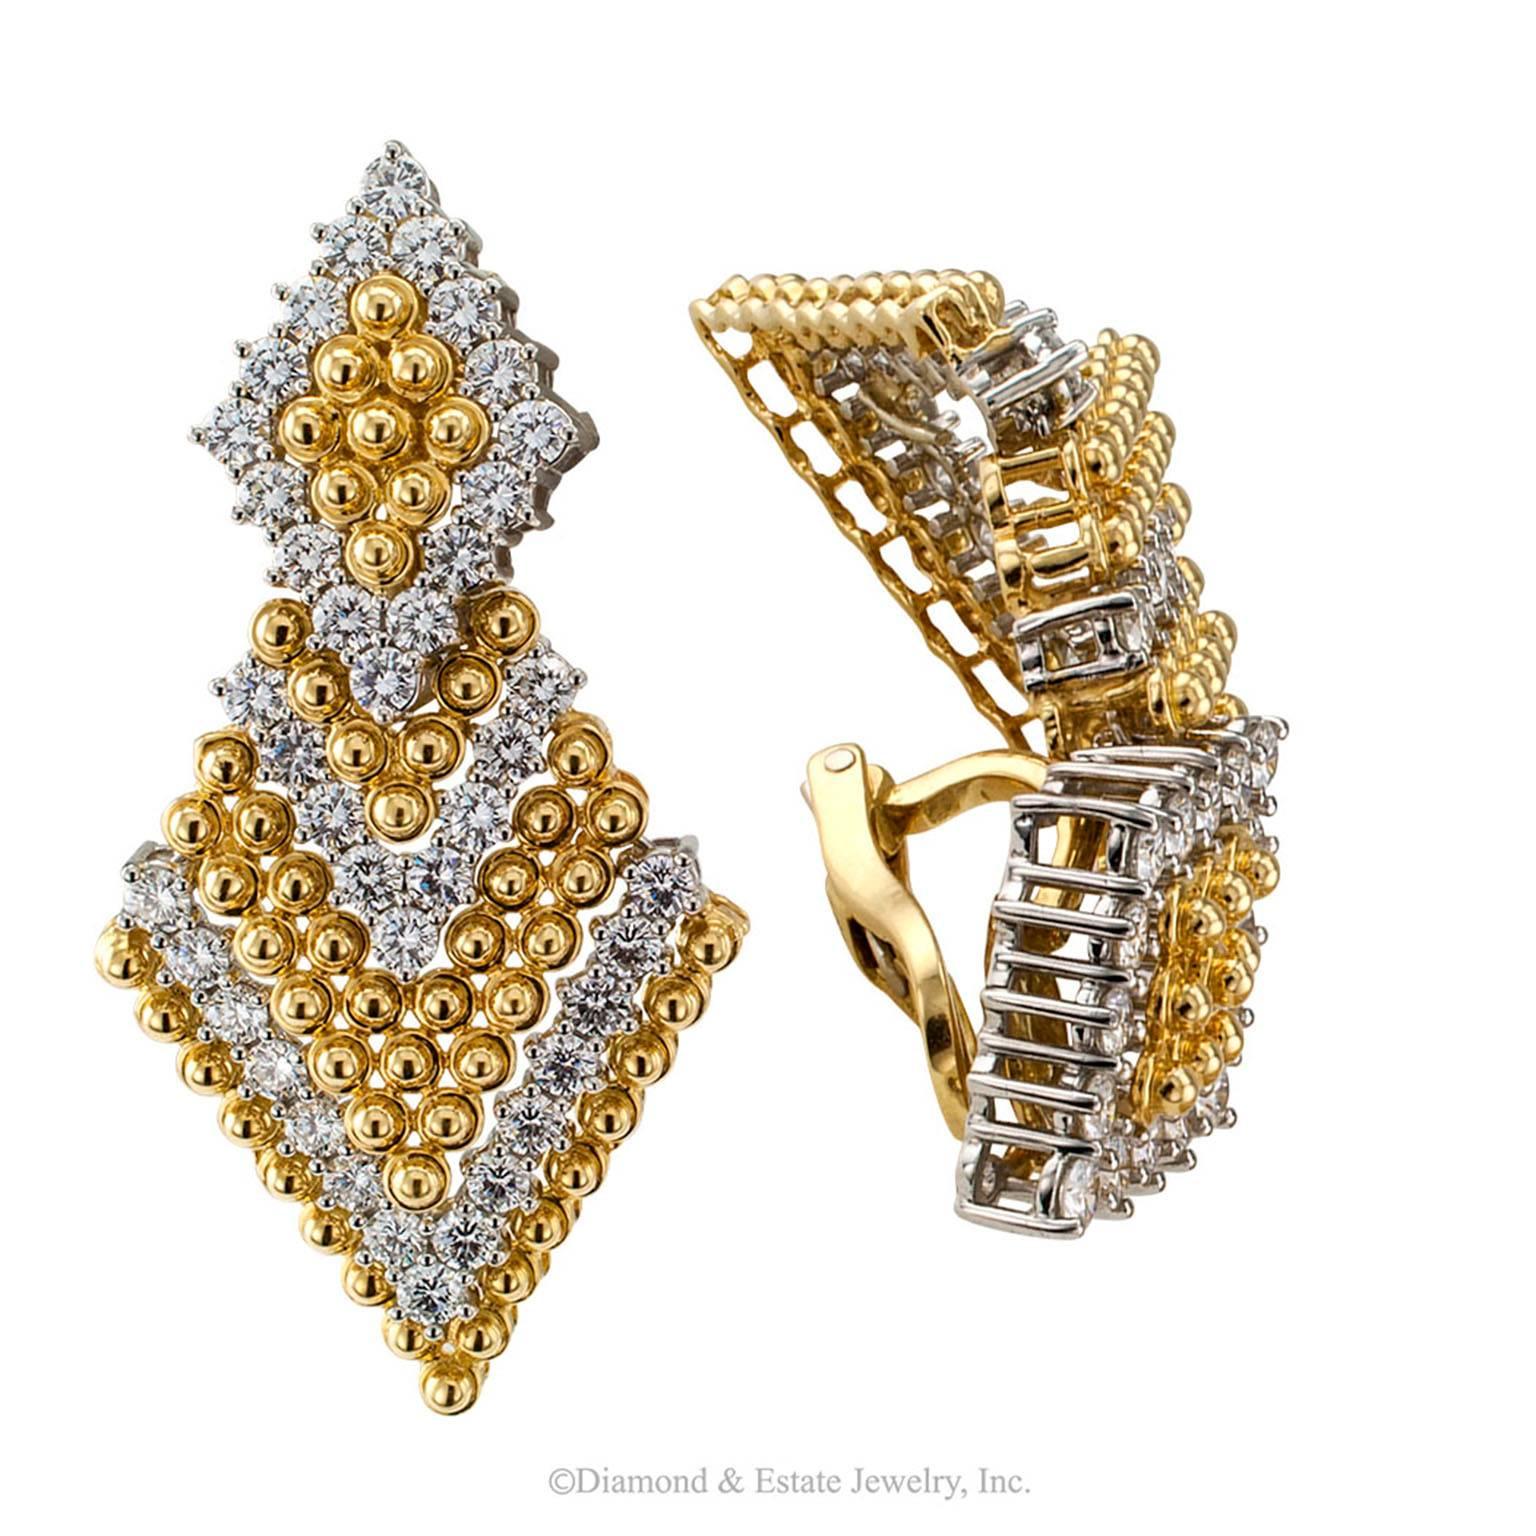 Triangular Door Knocker Diamond Yellow Gold Platinum Earrings

7.00 carats diamond gold and platinum pendent earrings circa 1990.  The articulated bottoms on these divine earrings help set those diamonds literally on fire with the slightest